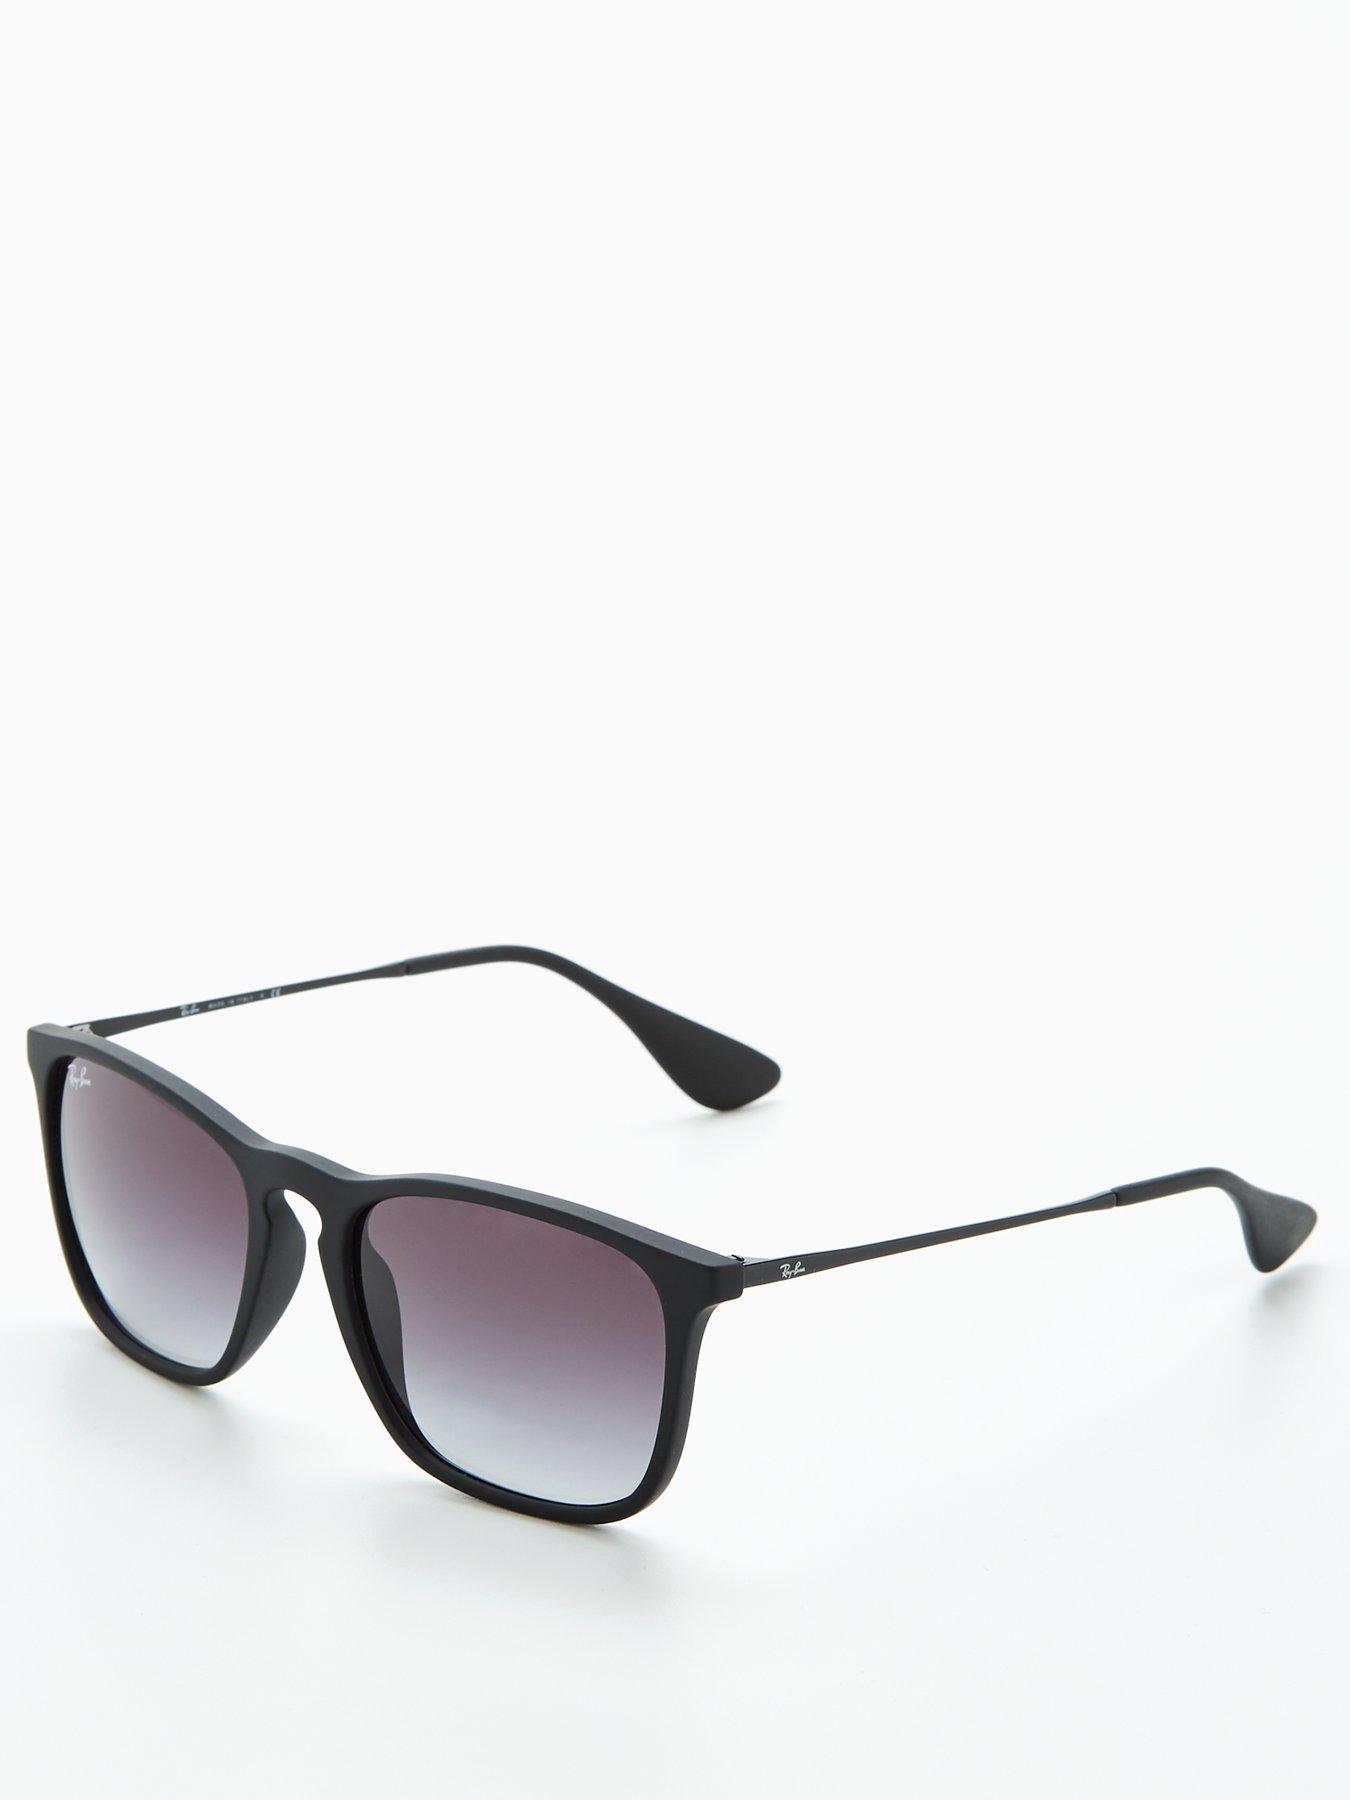 abercrombie fitch rectangle sunglasses